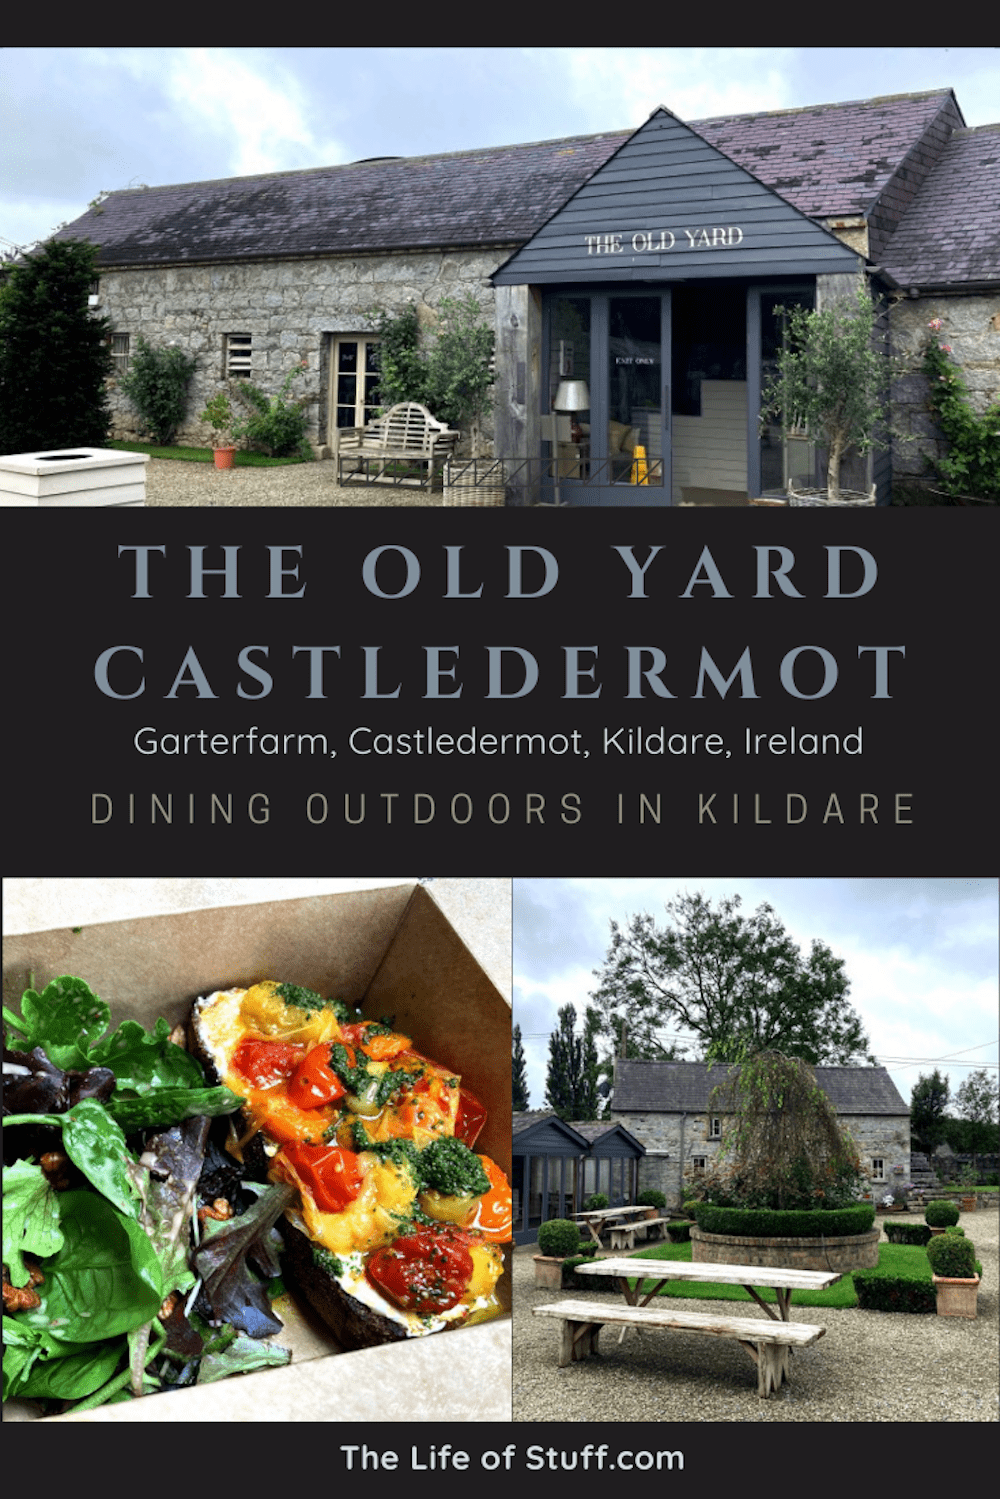 Brunch at The Old Yard Castledermot, Dining Outdoors in Kildare - The Life of Stuff